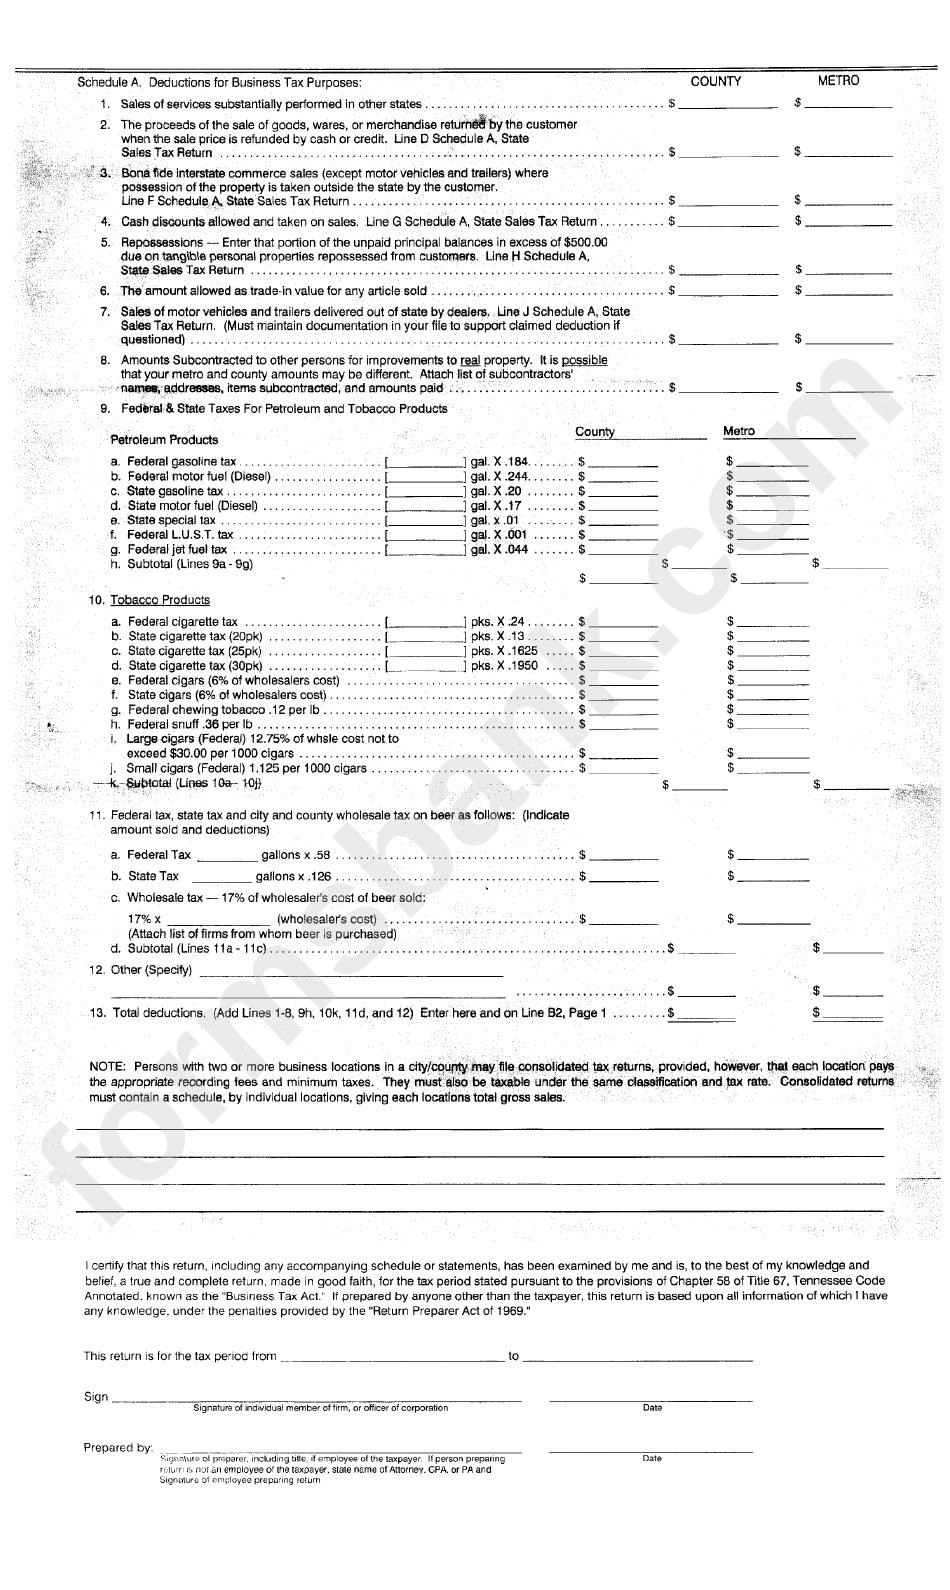 Application For Business Tax License And Report To County Clerk - Metropolitan Government Of Nashville And Davidson County